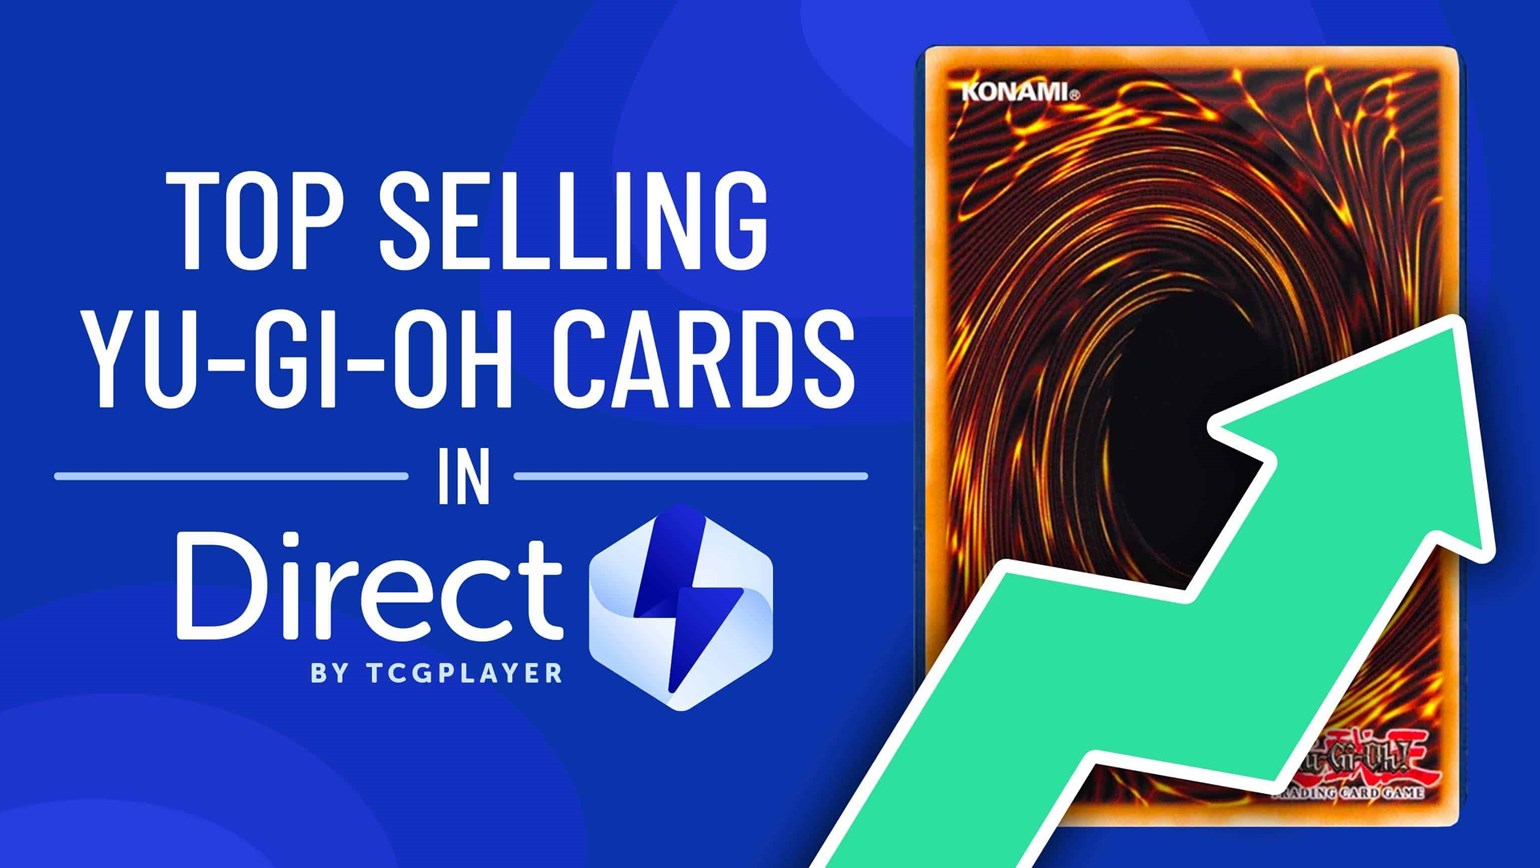 April Top Selling Yu-Gi-Oh! Cards Under $25 in Direct by TCGplayer